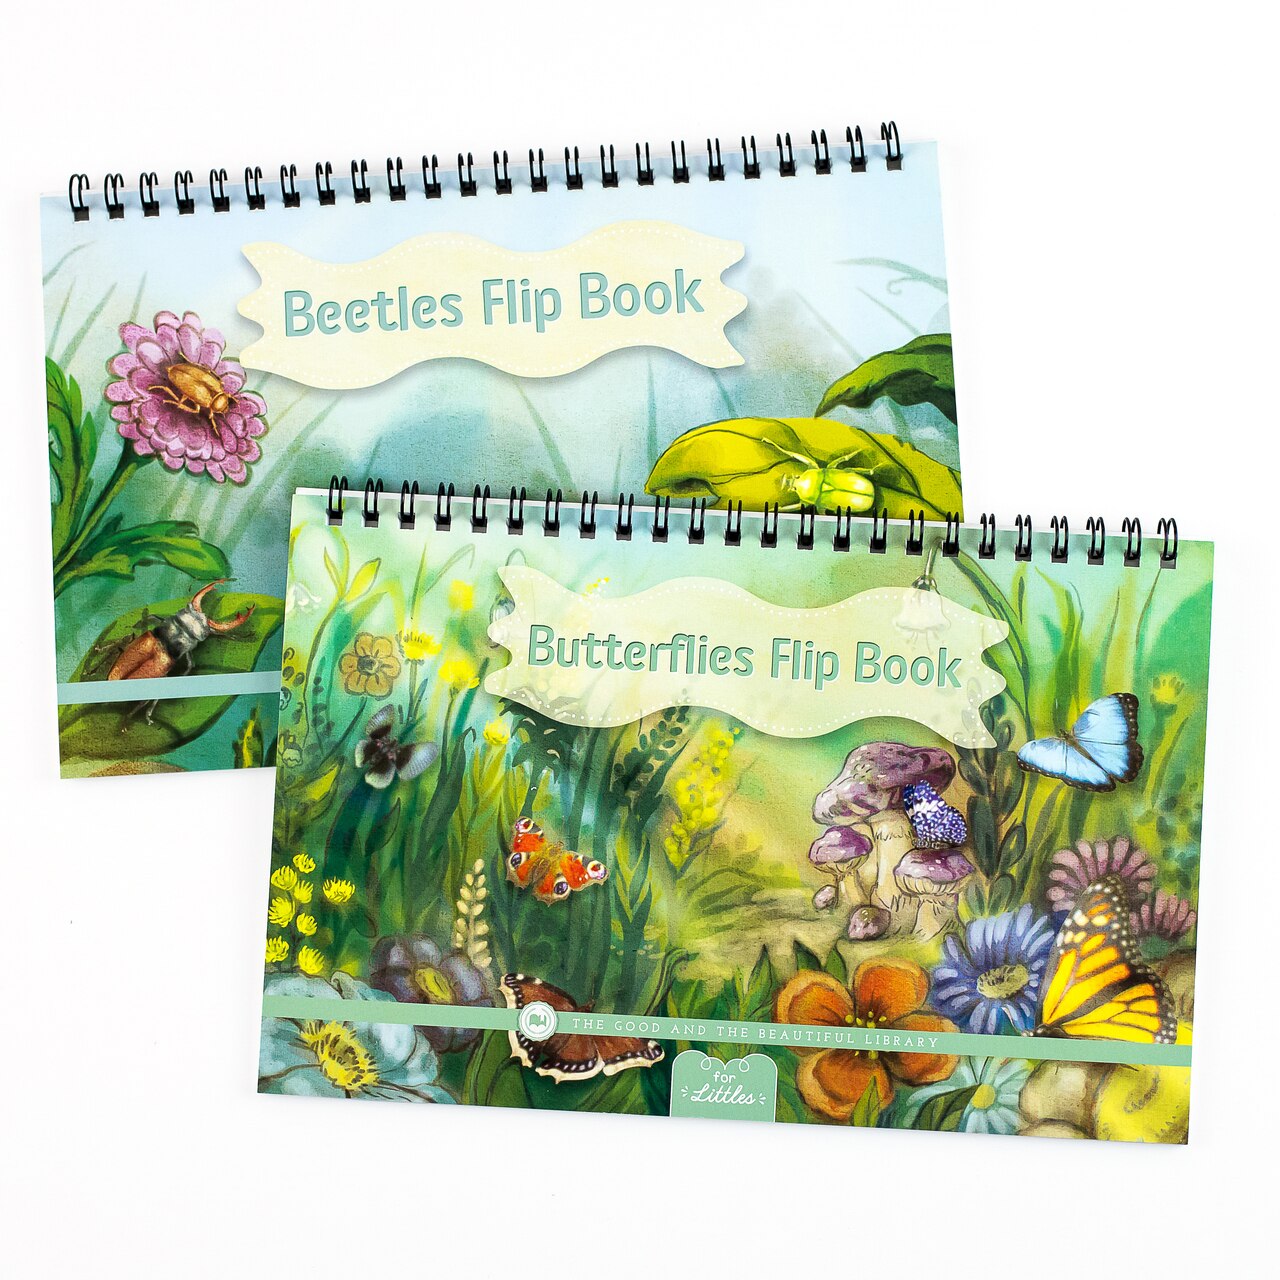 Butterflies and Beetles Flip Books hands-on, independent activity perfect for preschoolers to explore as they match up different insects or make silly creature combinations